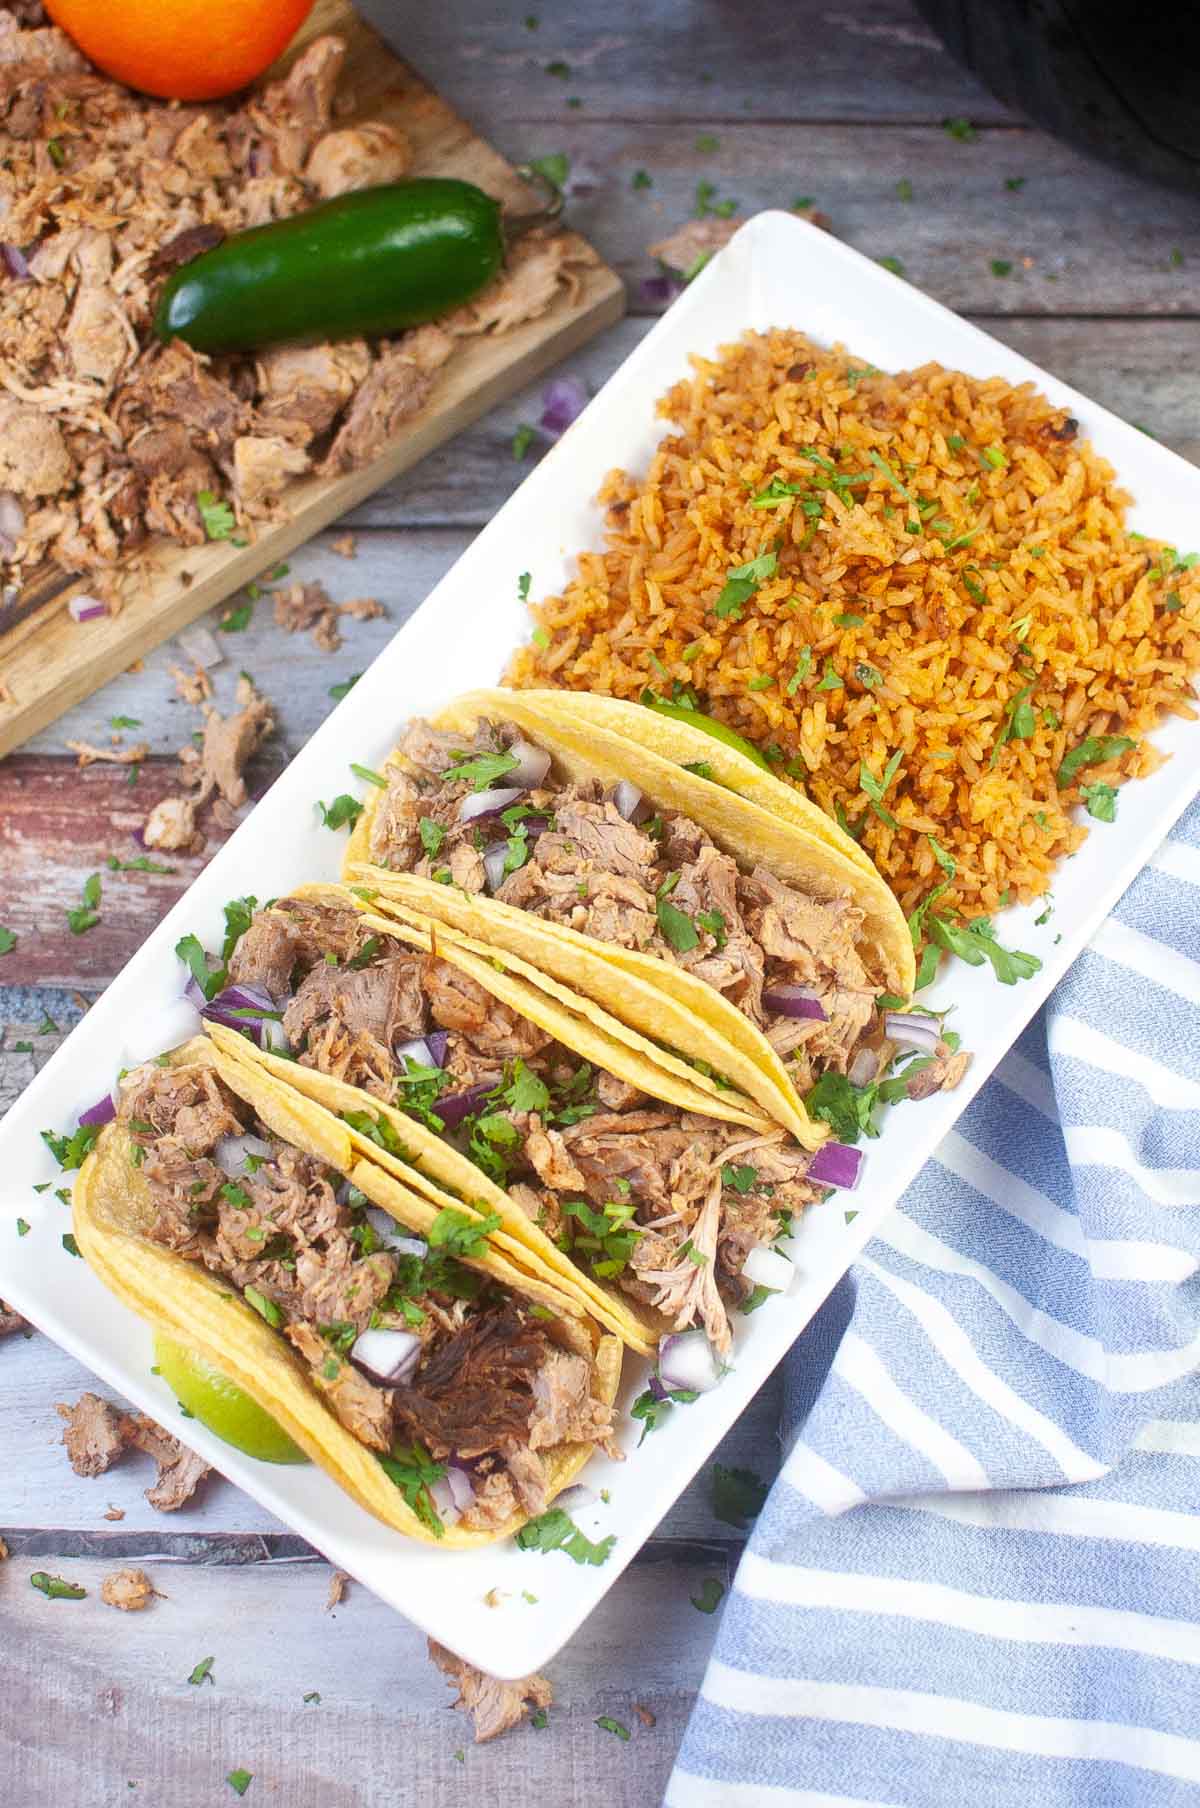 Three tacos on a plate with rice.